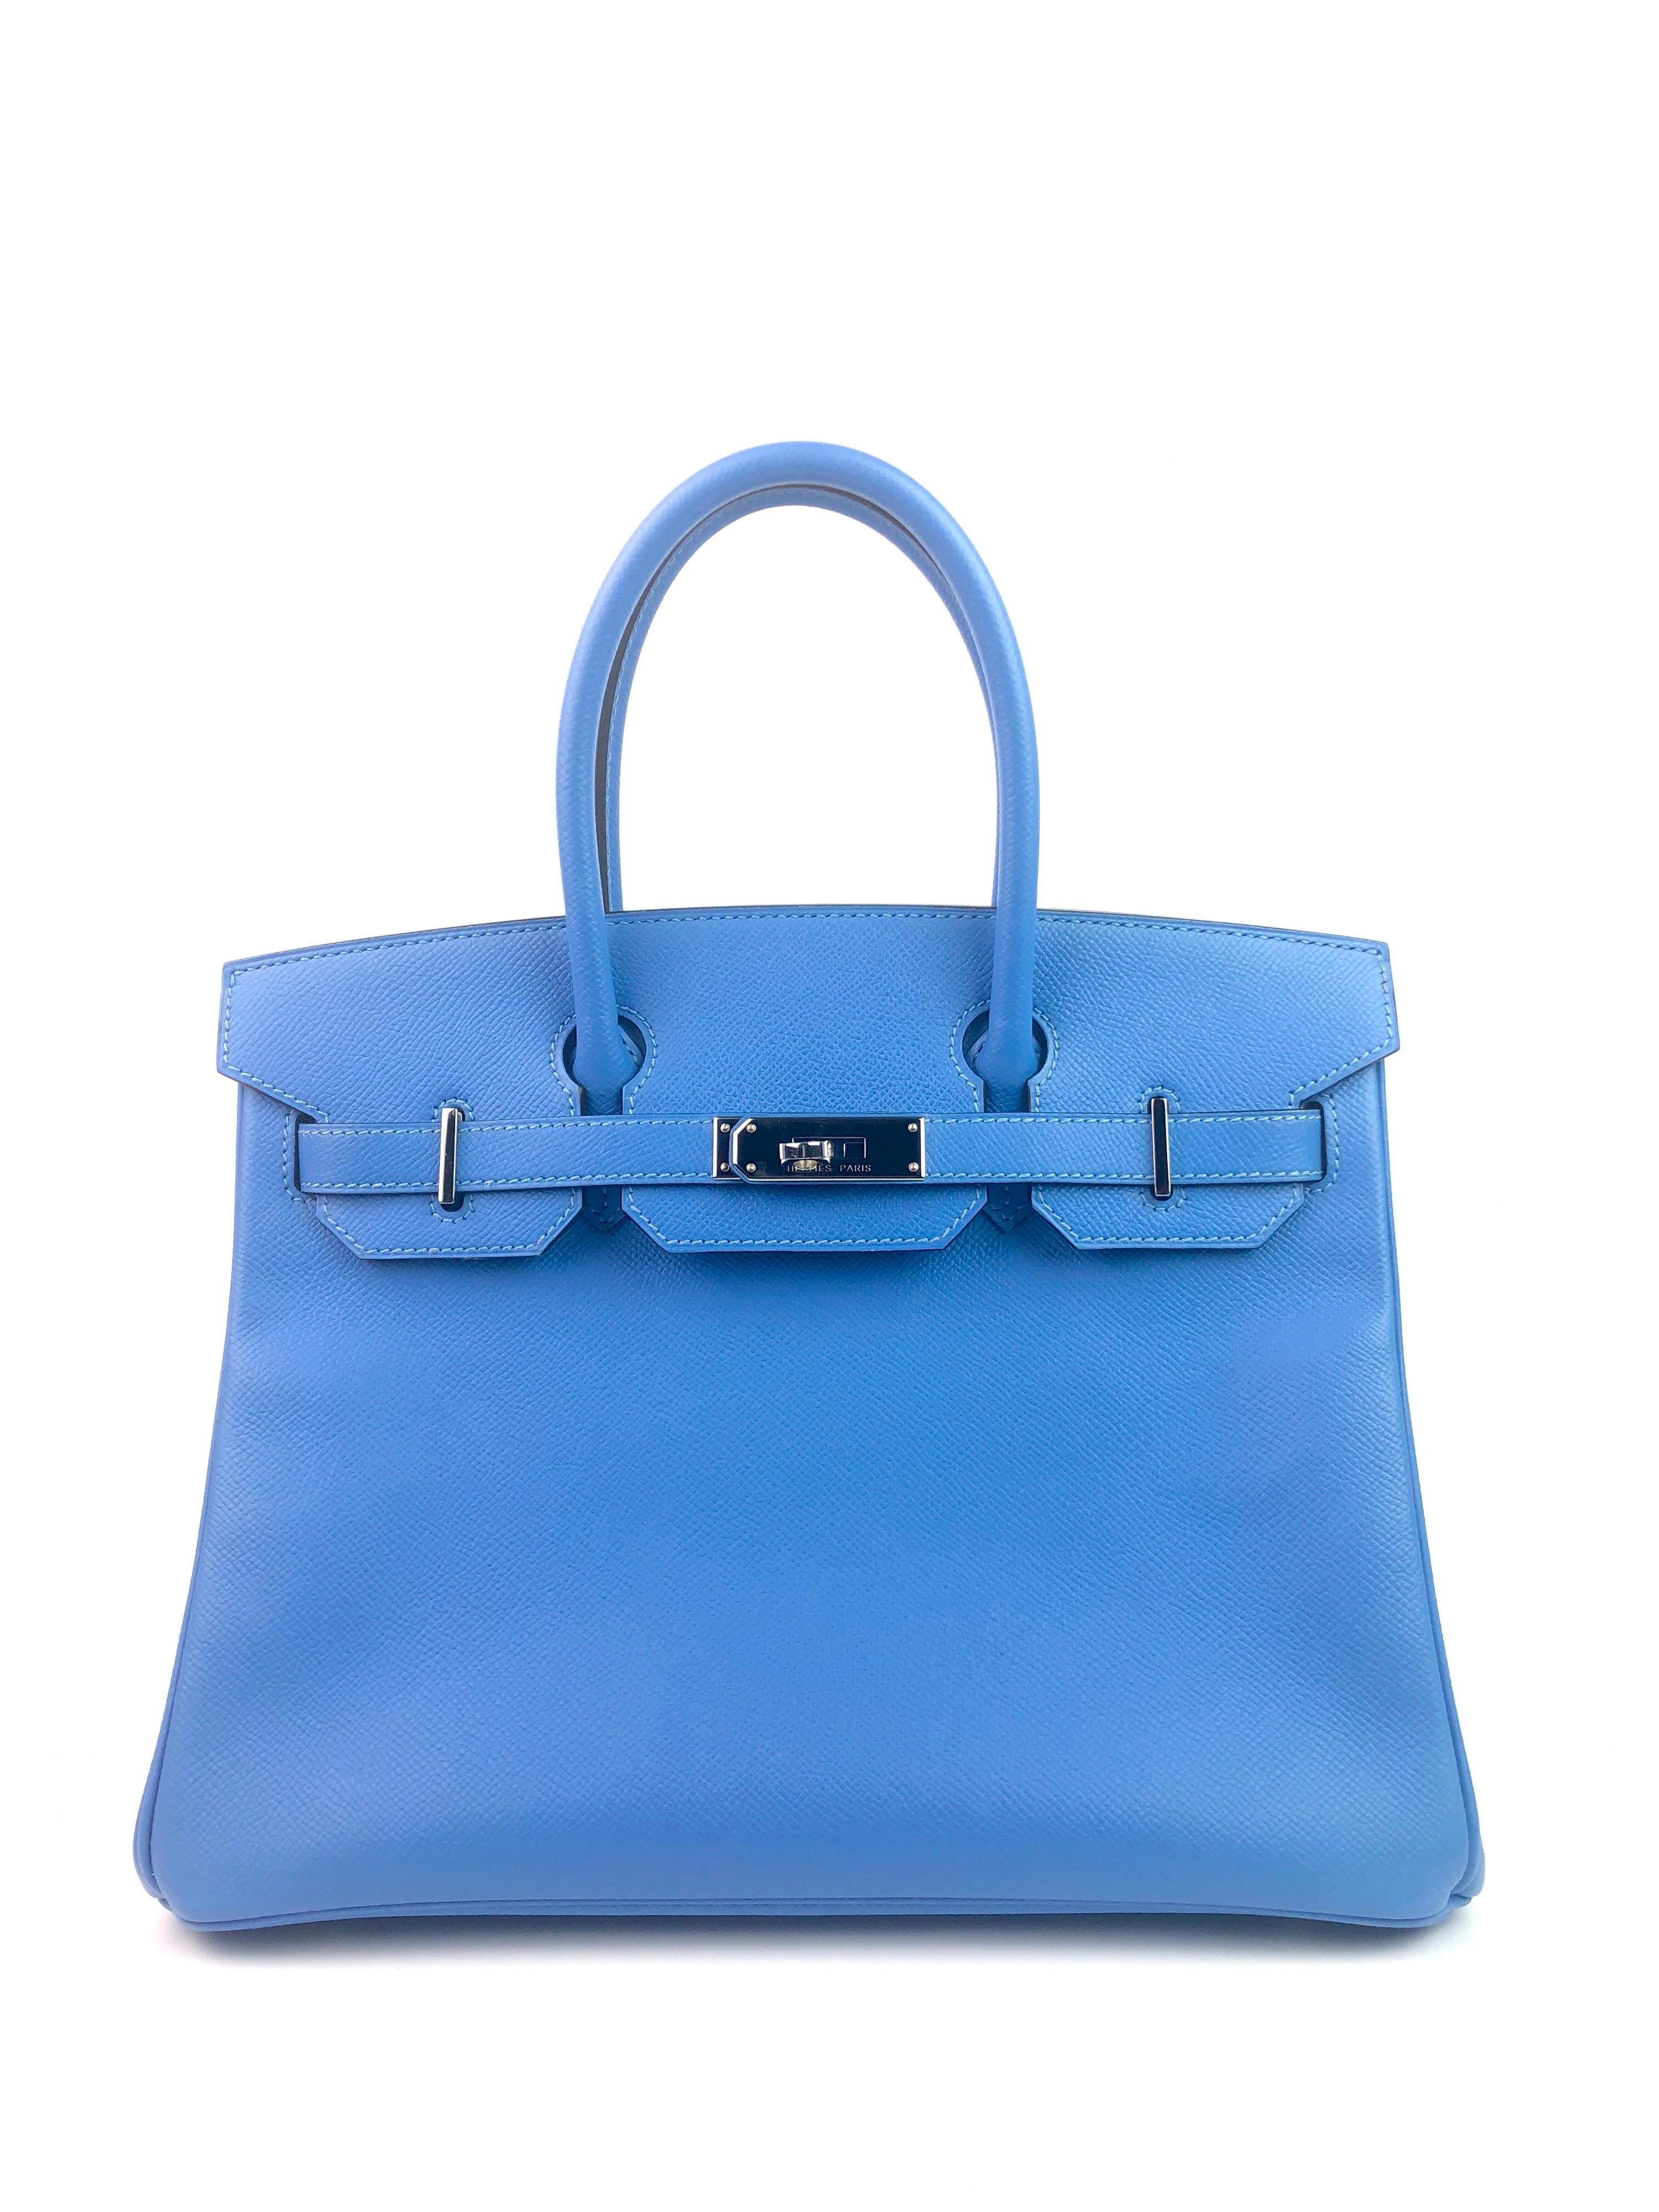 Hermes Birkin 30 Blue Paradise Epsom Palladium Hardware . R Stamp 2014 Excellent Pristine Condition, light hairlines hardware, perfect corners and structure.

Shop with Confidence from Lux Addicts. Authenticity Guaranteed! 